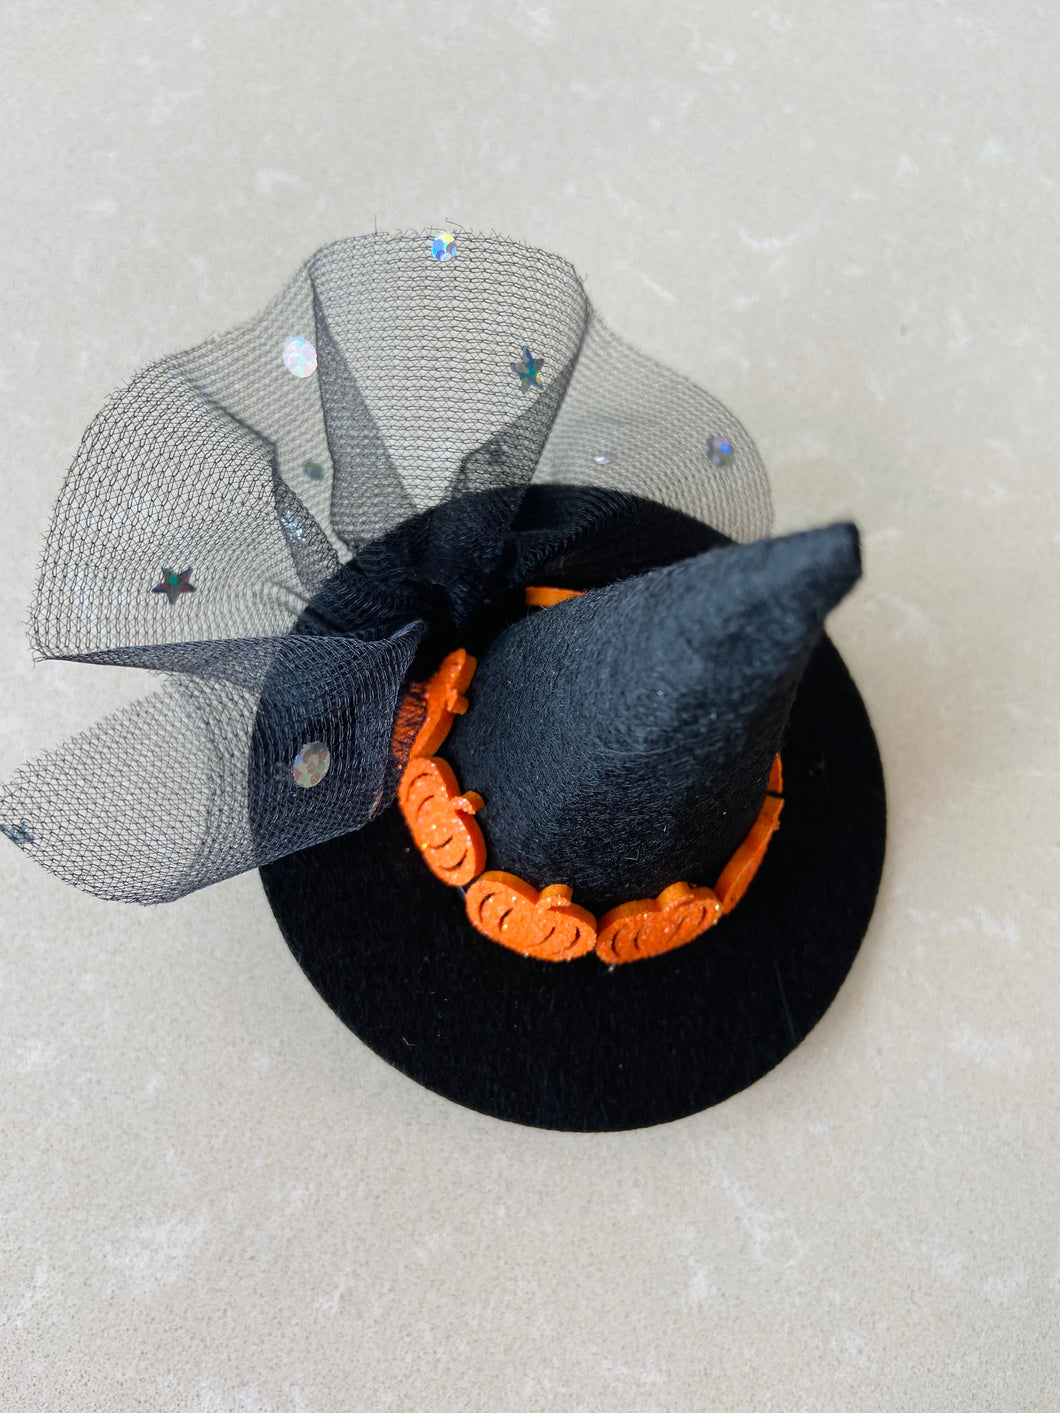 Witch's hat hairclip